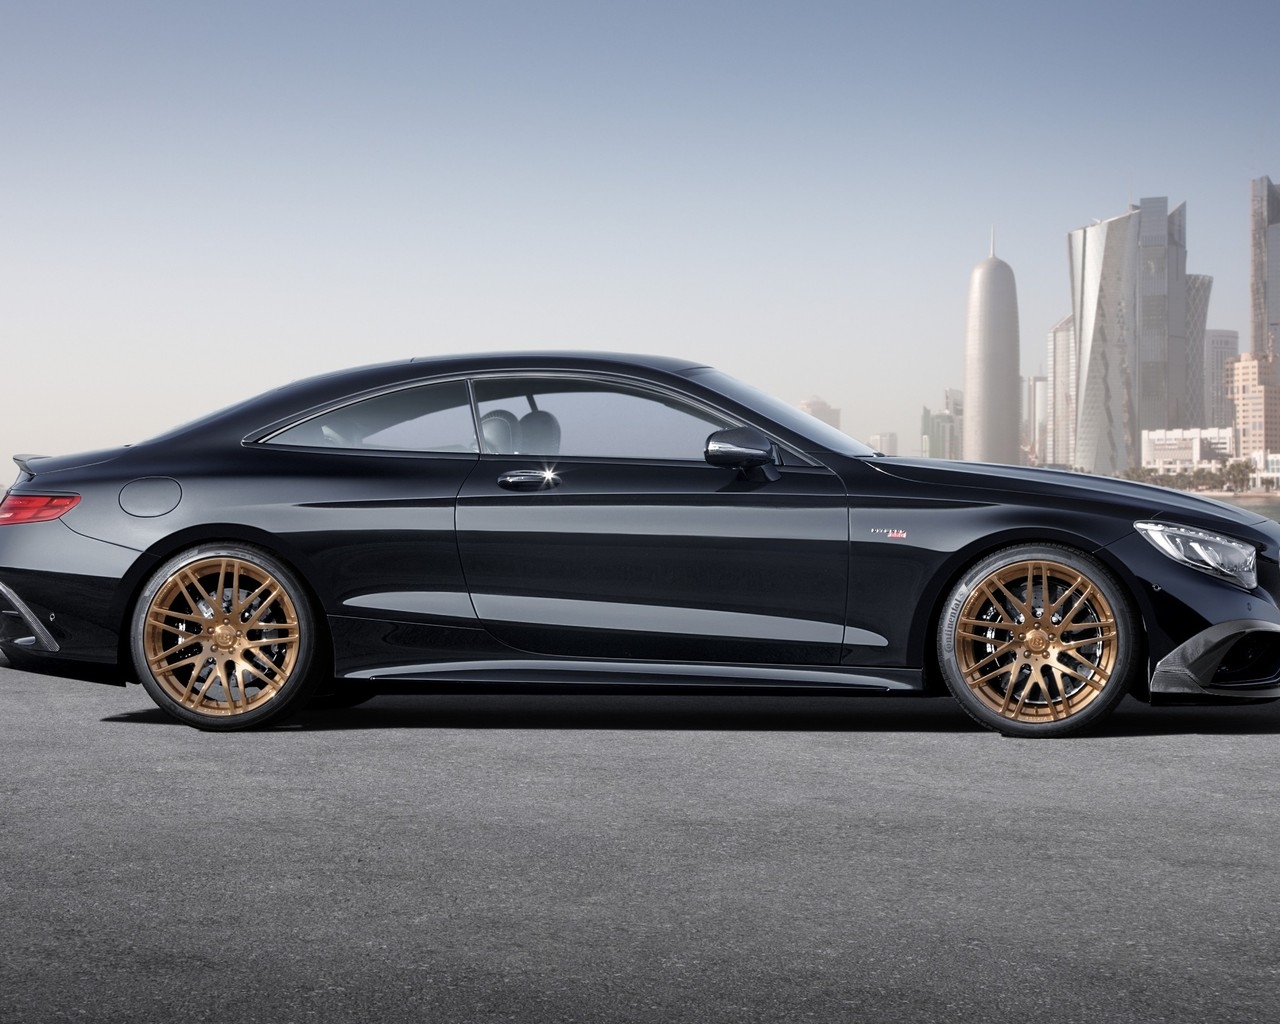 Mercedes Benz S63 AMG Brabus Side View for 1280 x 1024 resolution